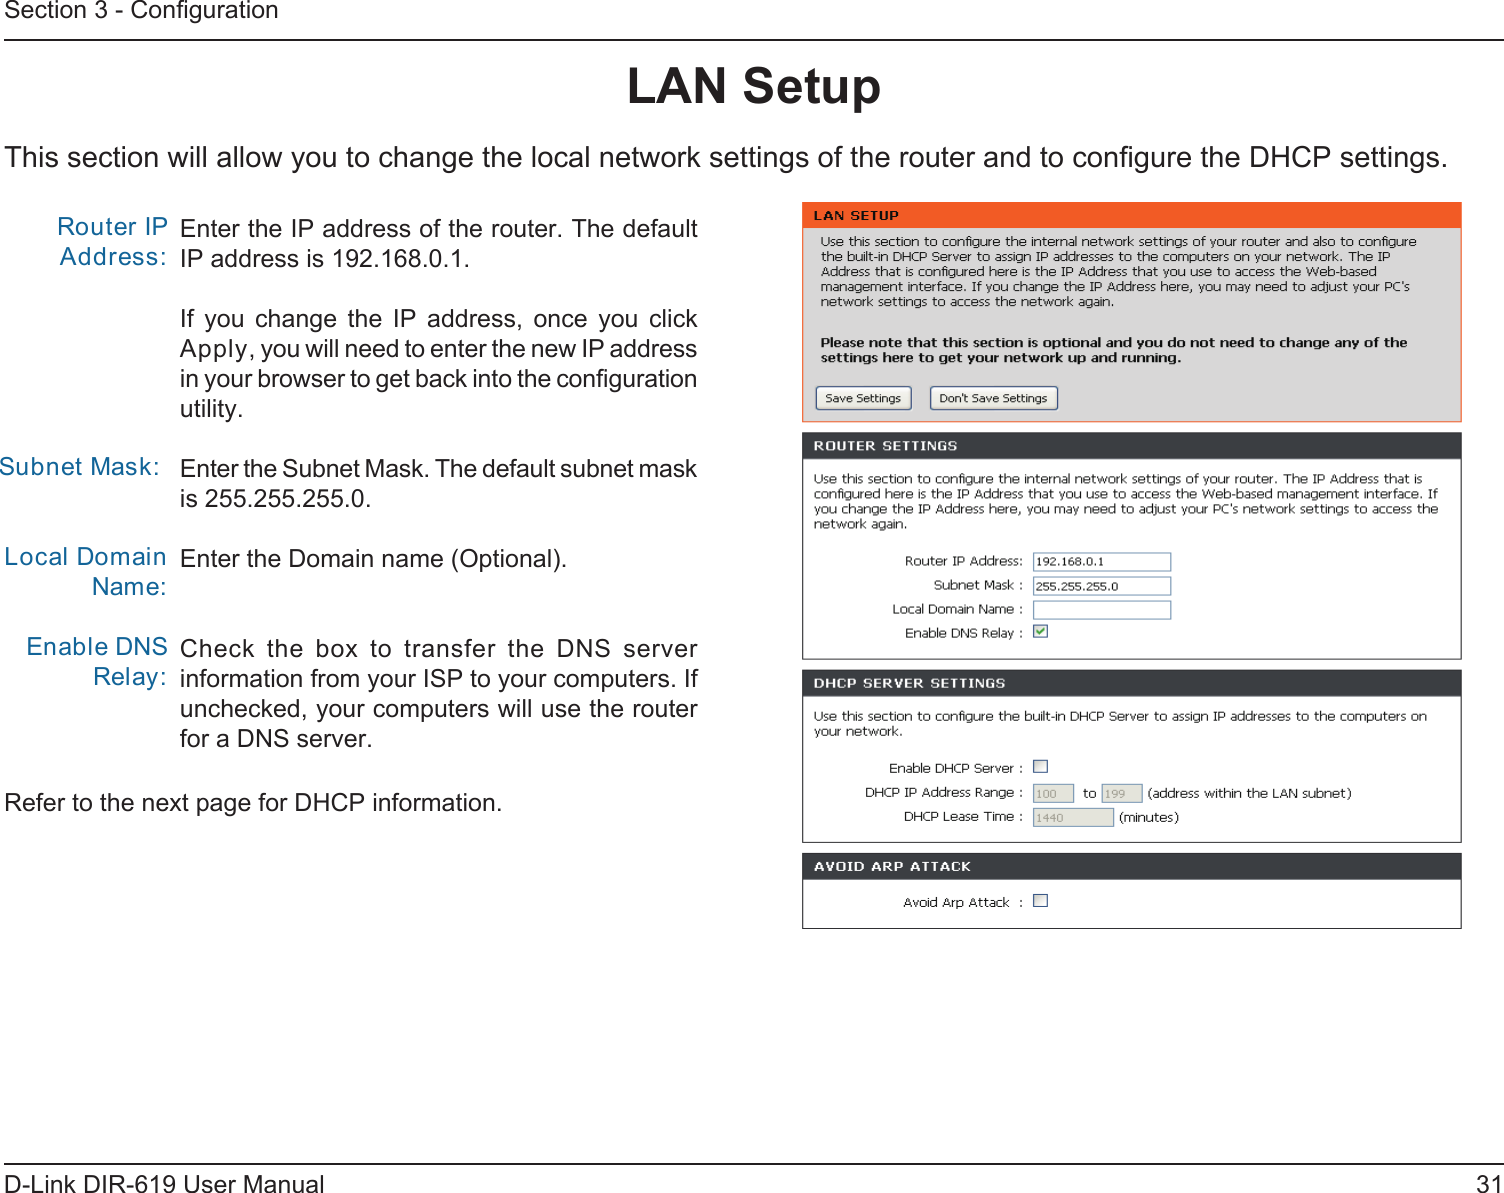 31D-Link DIR-619 User ManualSection 3 - ConﬁgurationThis section will allow you to change the local network settings of the router and to conﬁgure the DHCP settings.LAN SetupEnter the IP address of the router. The defaultIP address is 192.168.0.1.If  you  change  the  IP  address,  once  you  click Apply, you will need to enter the new IP address in your browser to get back into the conﬁguration utility.Enter the Subnet Mask. The default subnet maskis 255.255.255.0.Enter the Domain name (Optional).Check  the  box  to  transfer  the  DNS  server information from your ISP to your computers. Ifunchecked, your computers will use the router for a DNS server.Router IP Address: Subnet Mask:Local Domain Name:Enable DNS Relay:Refer to the next page for DHCP information.